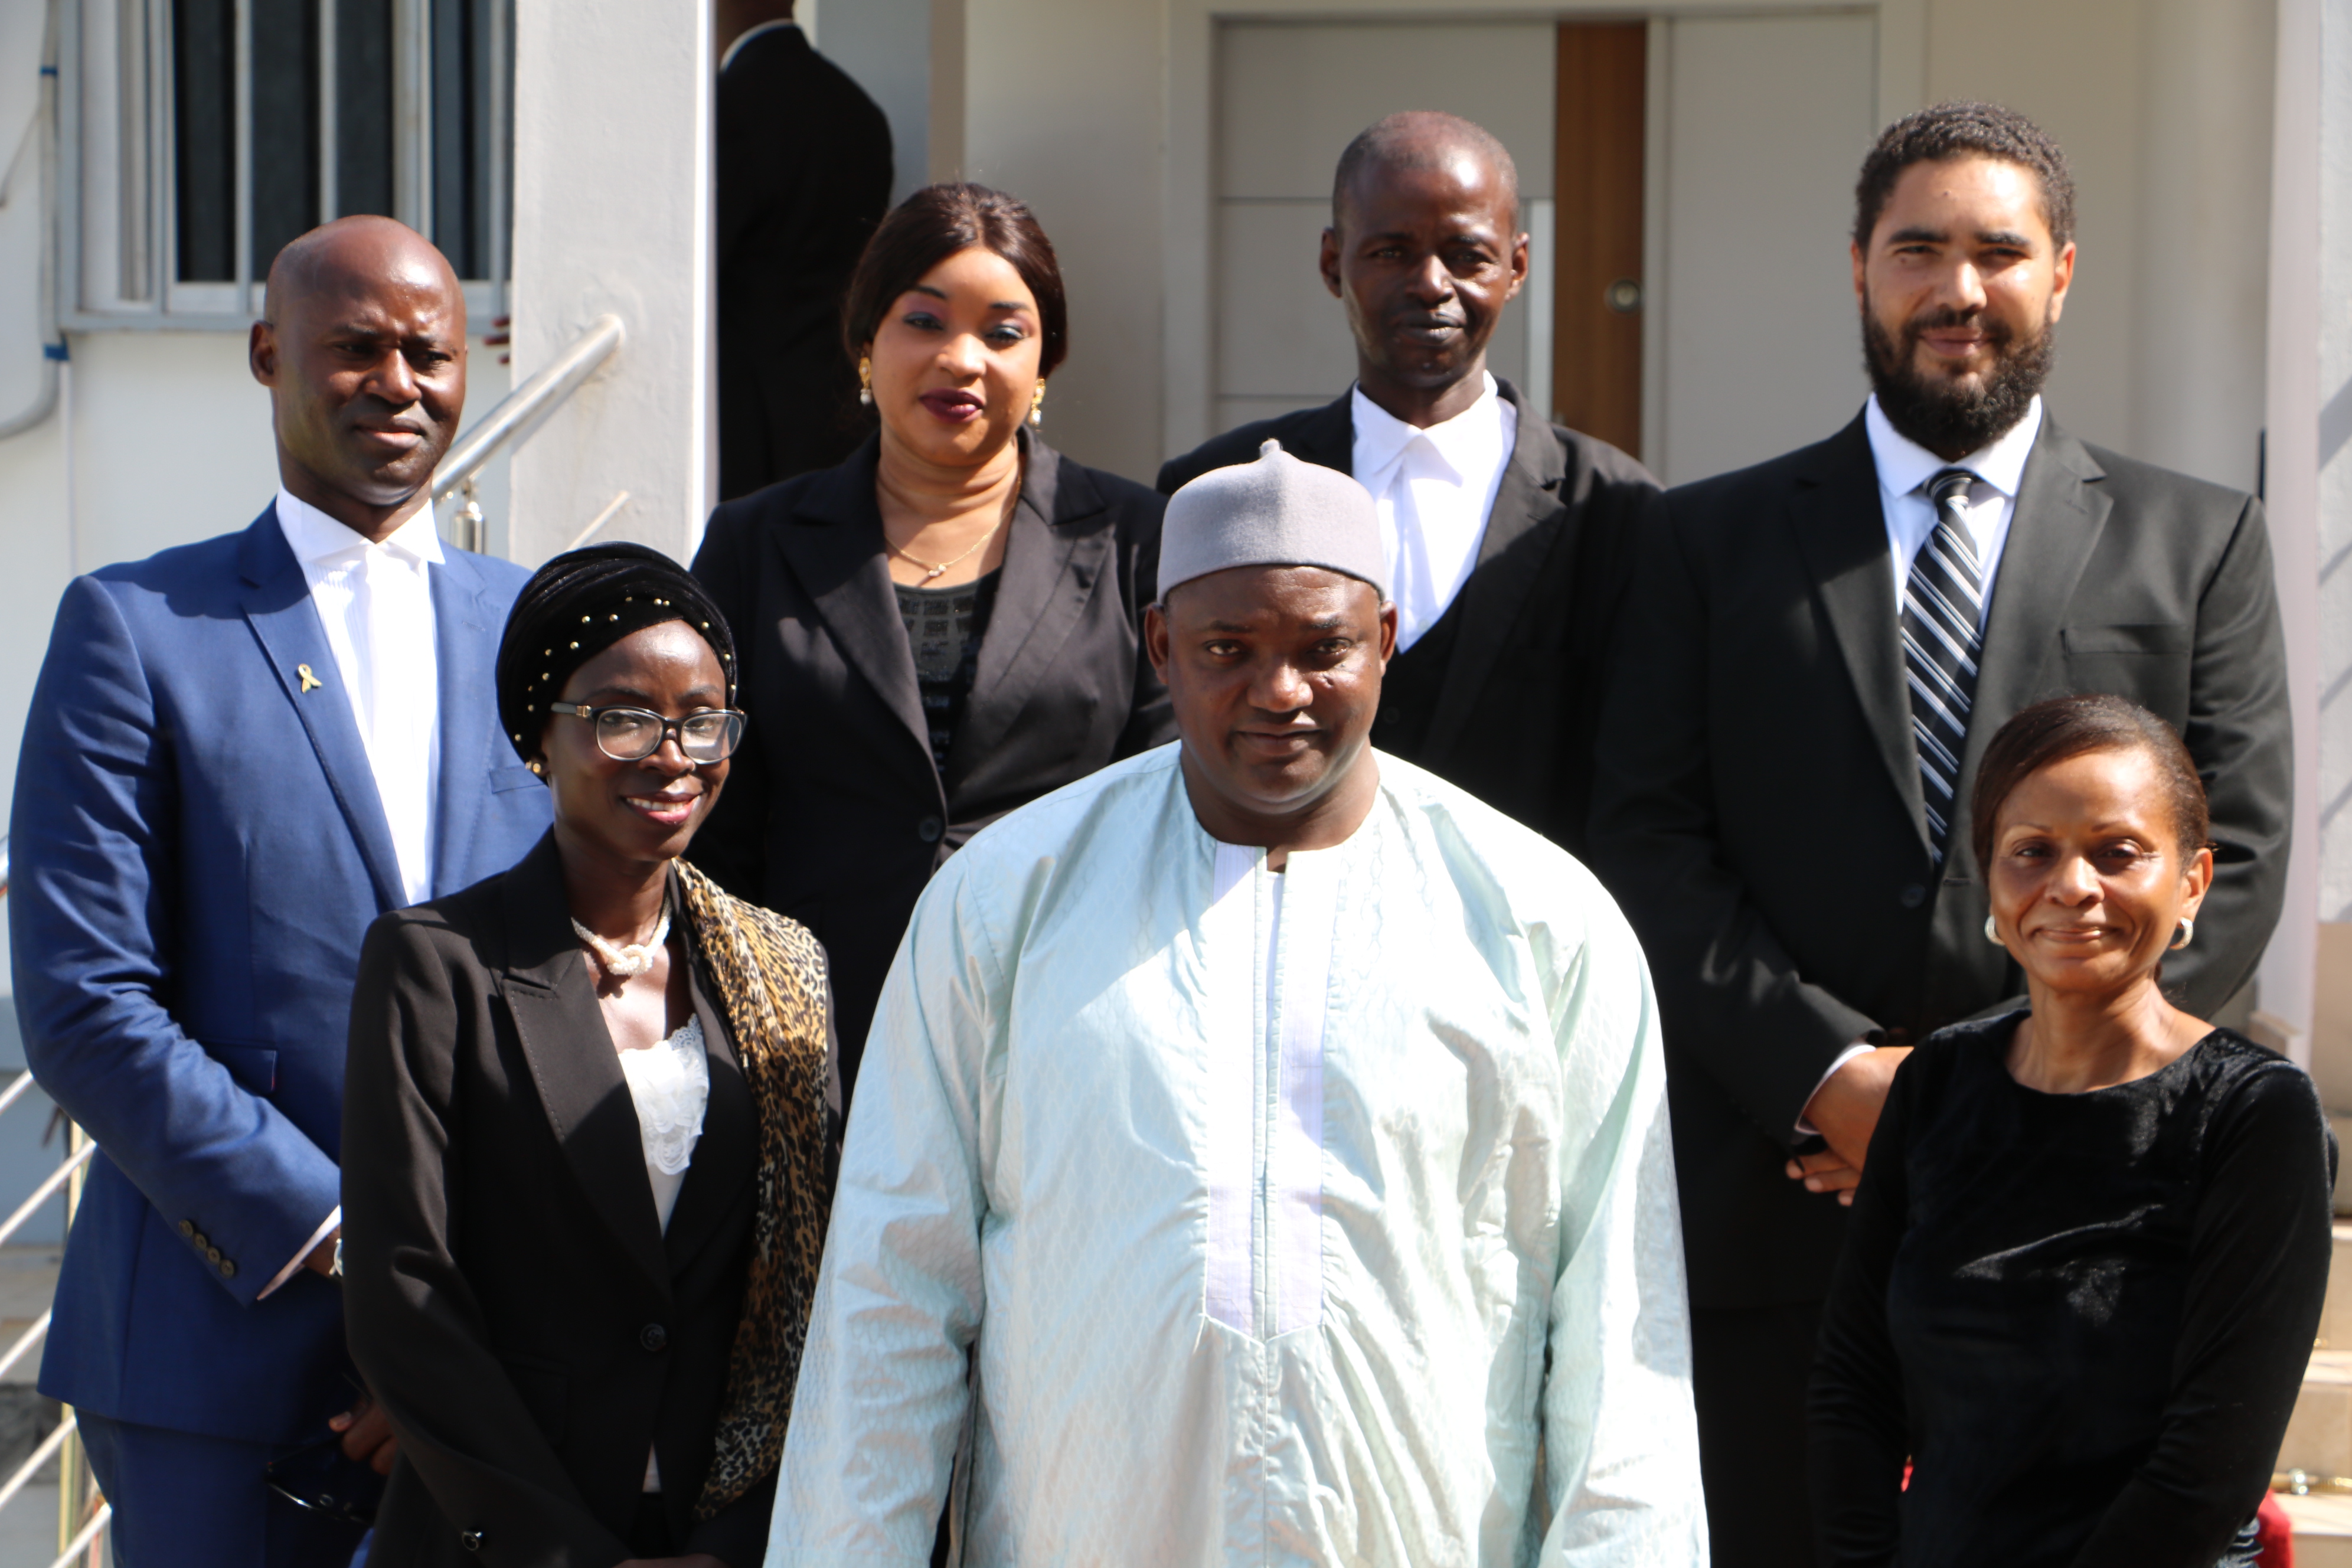 Six new Gambian judges take oath - swear to uphold justice